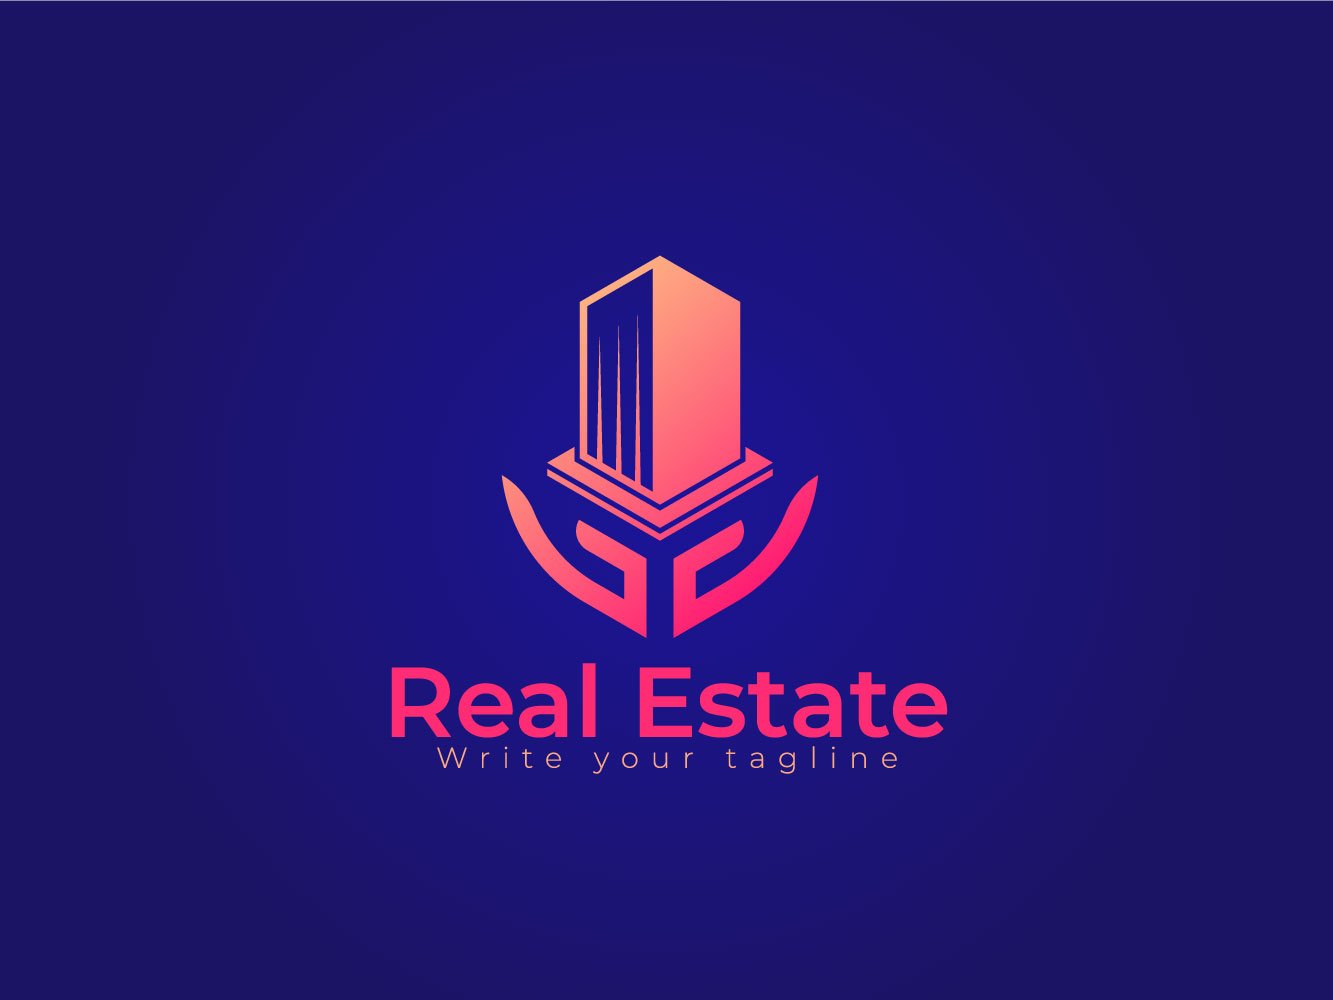 Real Estate Logo Design With Building And Hand Care Concept